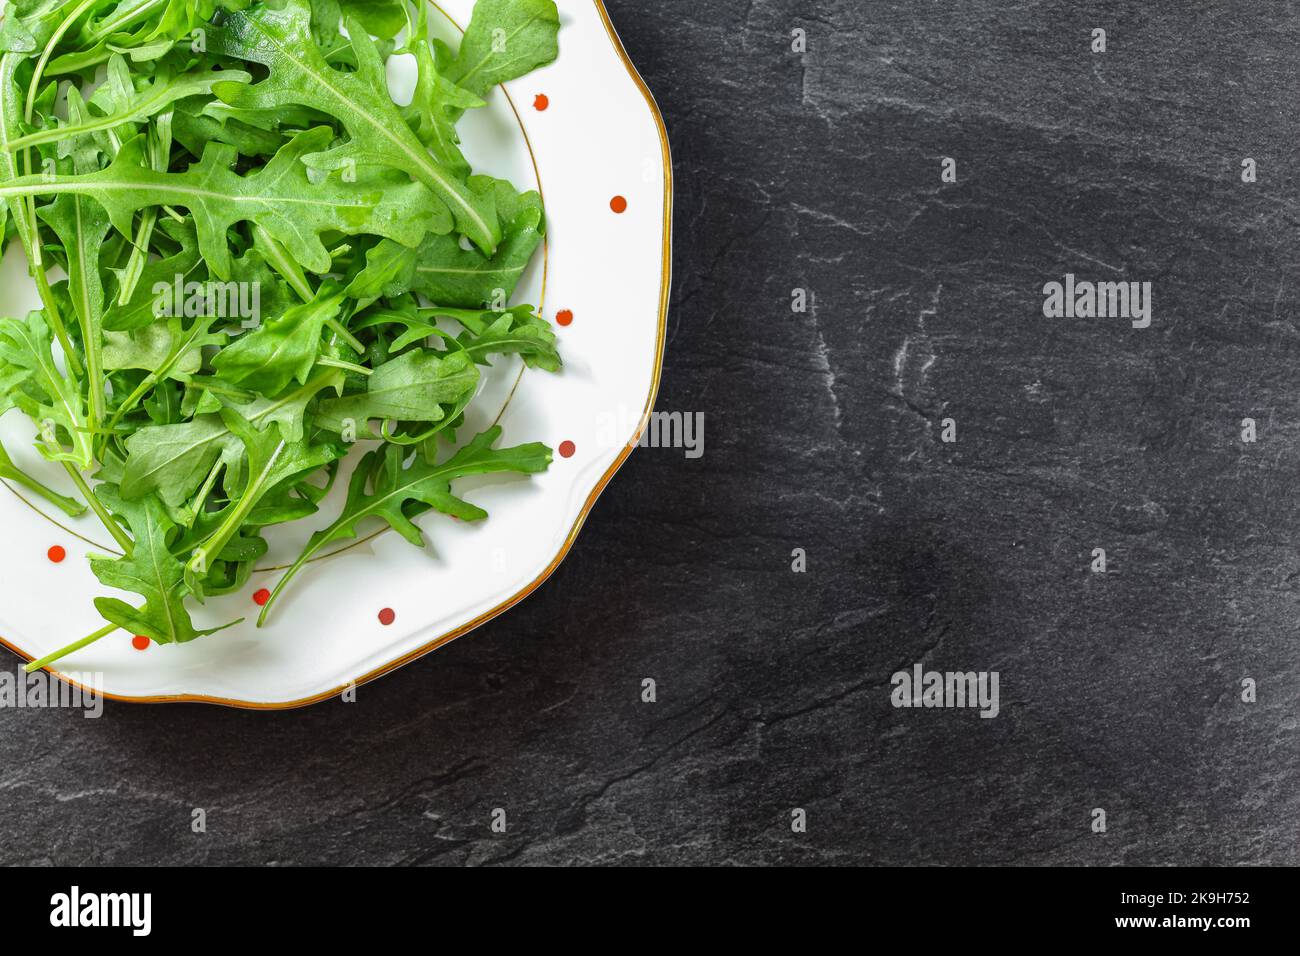 Fresh green arugula or garden rocket leaves on white plate with red dots, black table space for text right side under. Healthy greens and salads Stock Photo